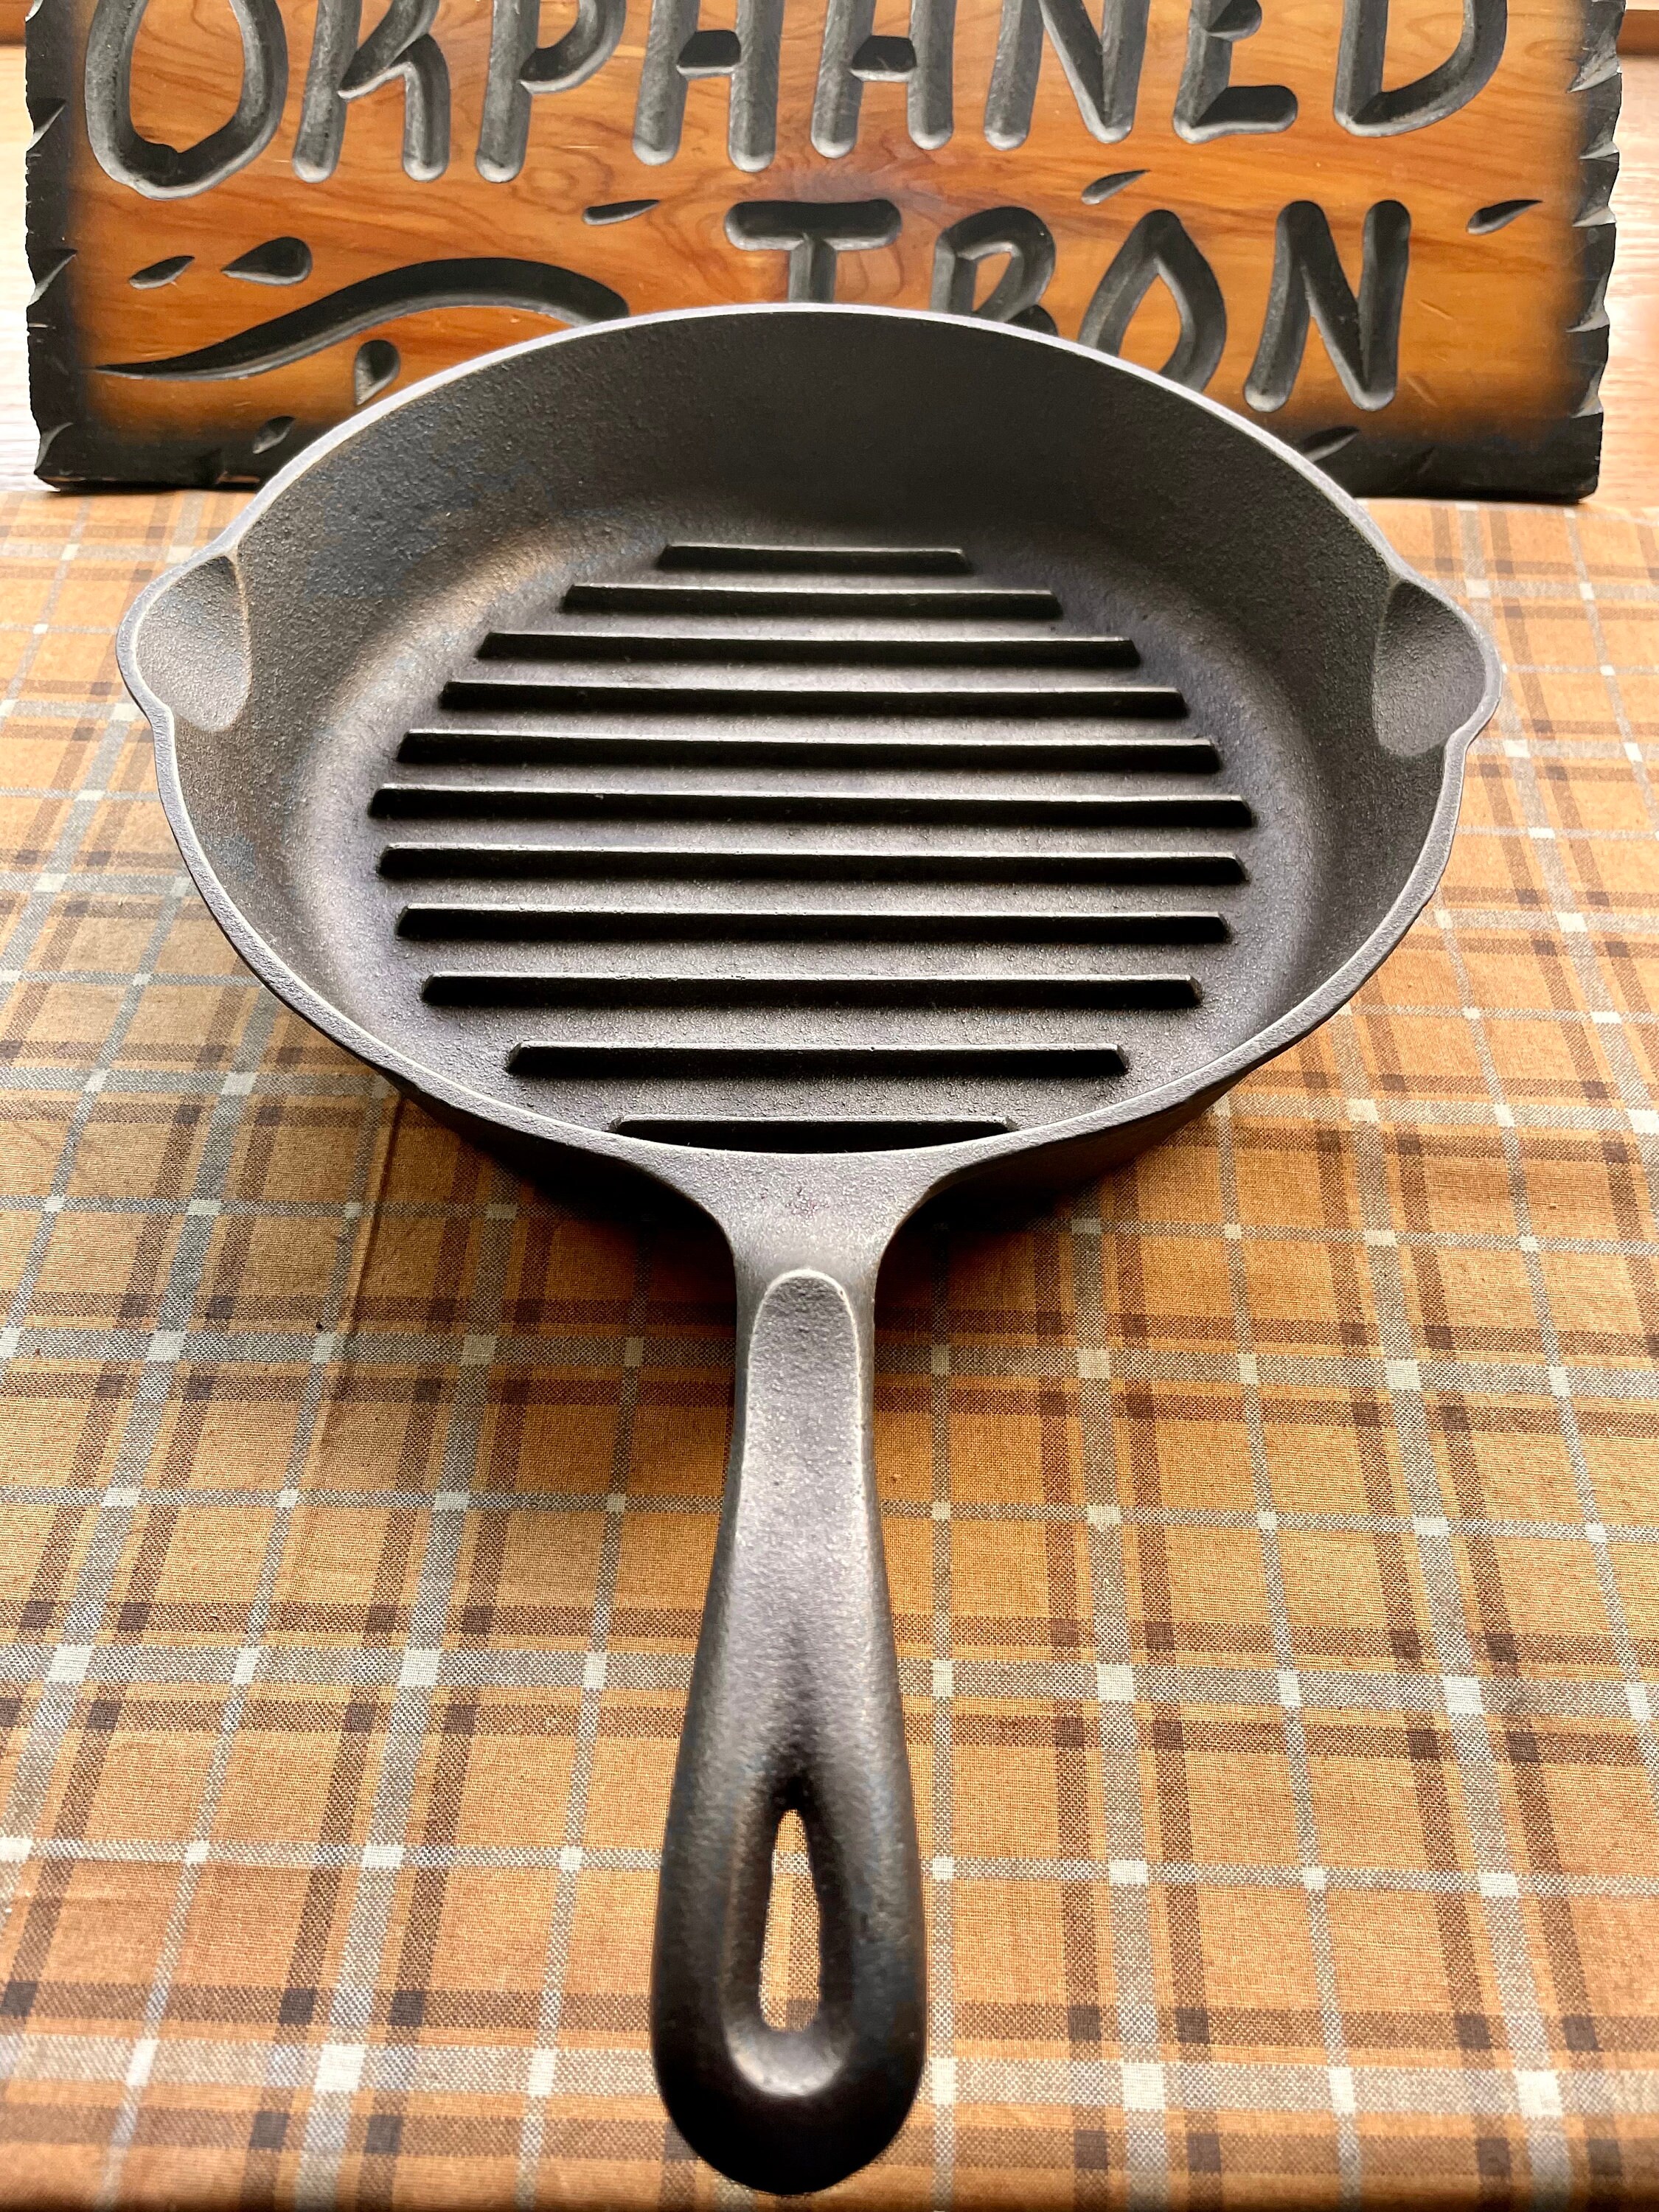 Palm 9.5 Unseasoned Cast Iron Grill Pan New Gifts For Him Her